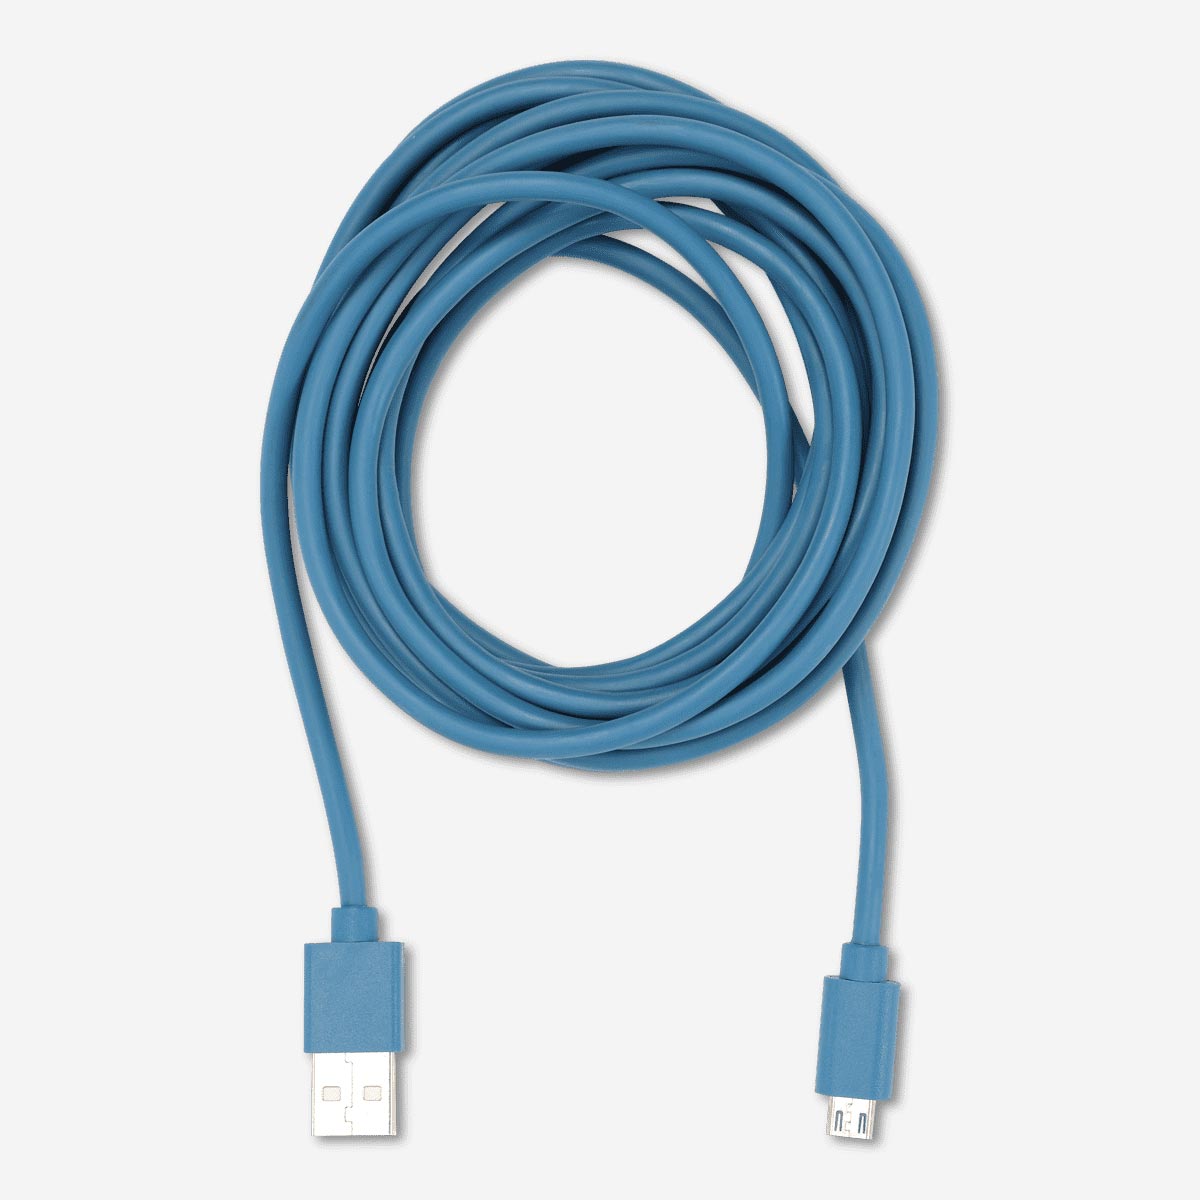 Charging cable. For micro USB Media Flying Tiger Copenhagen 